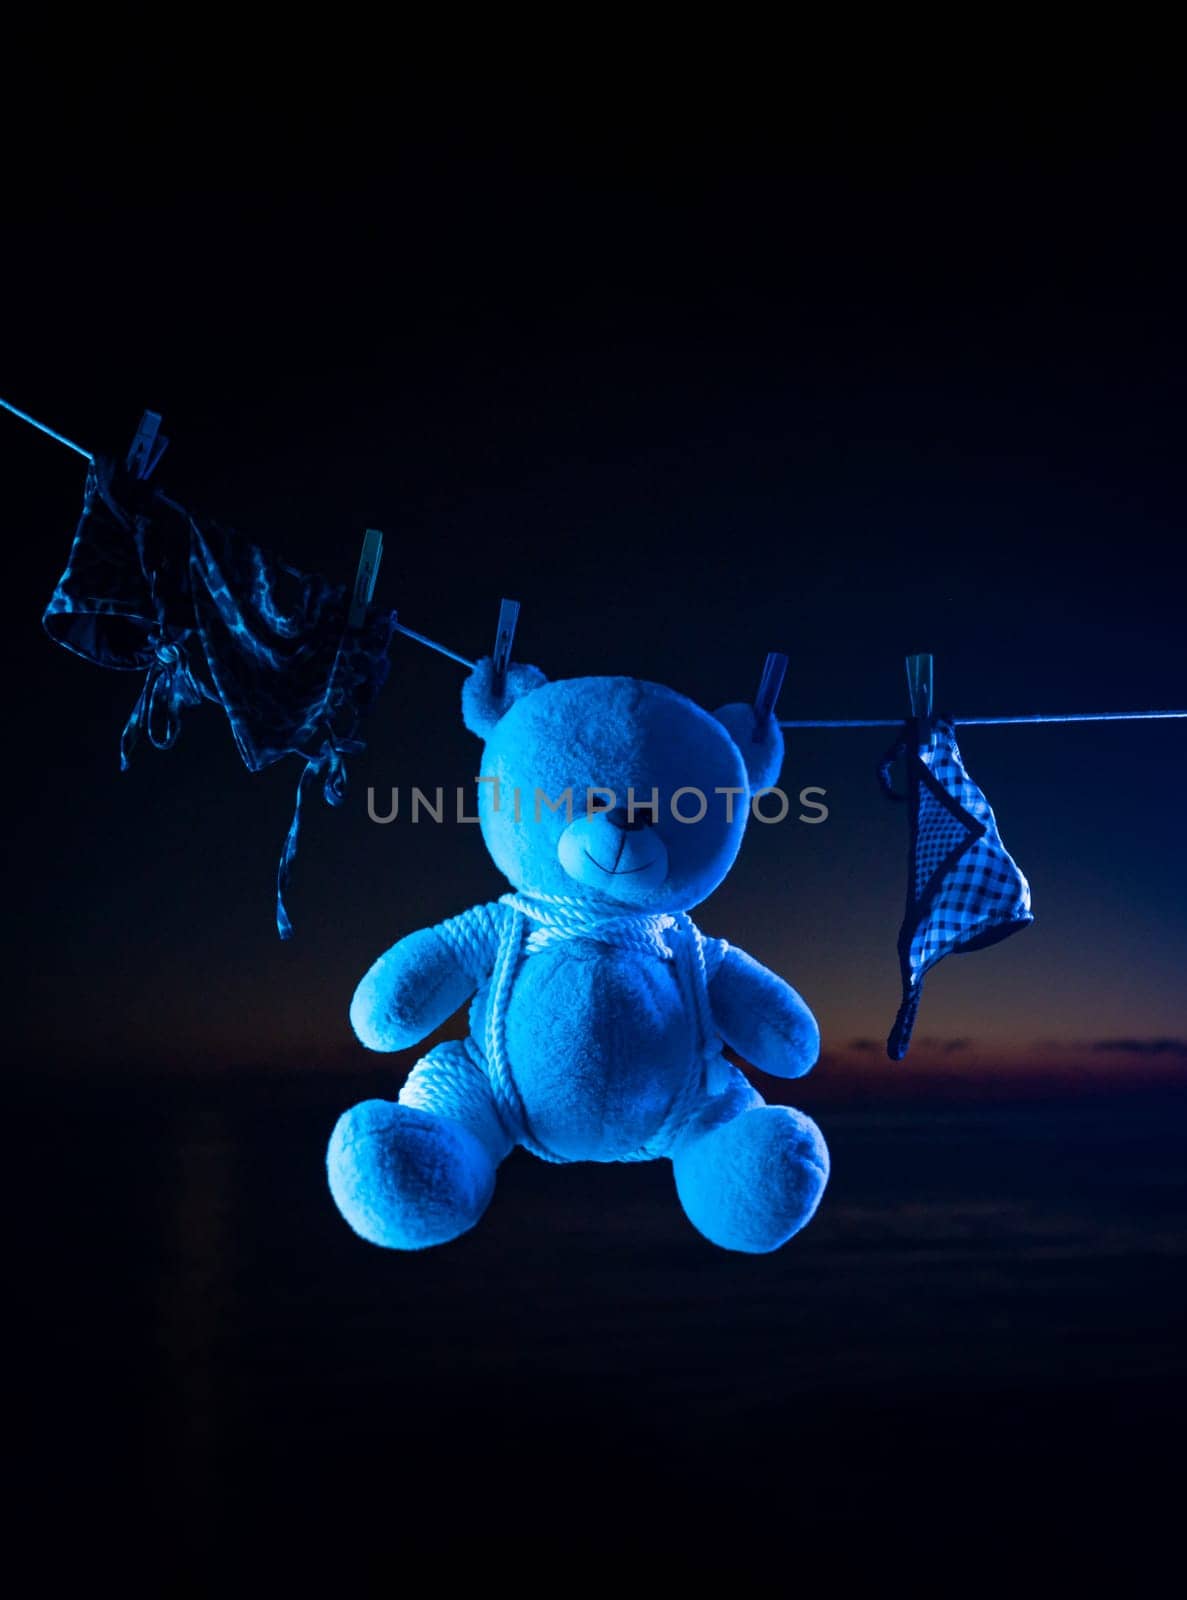 A teddy bear toy hangs on a clothesline on clothespins in neon light. tied with shibari ropes by Rotozey